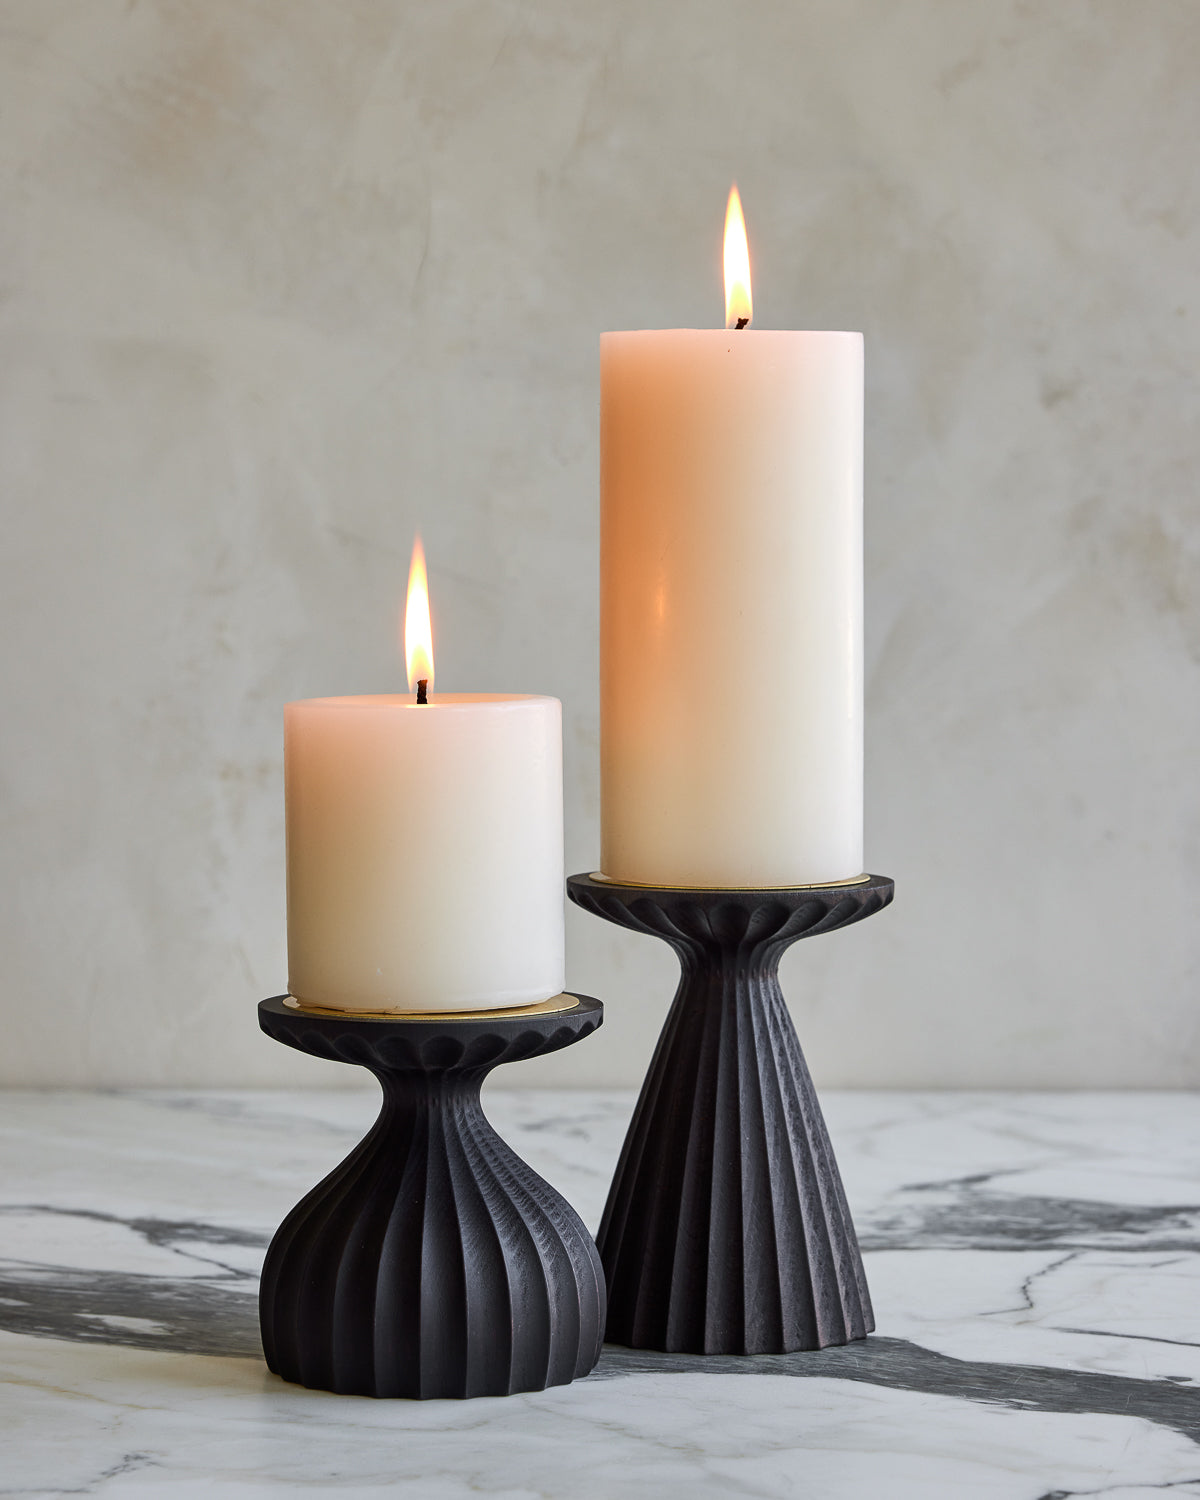 Pair of delicately grooved pillar candle holders in dark wash maple wood with shell white pillar candles